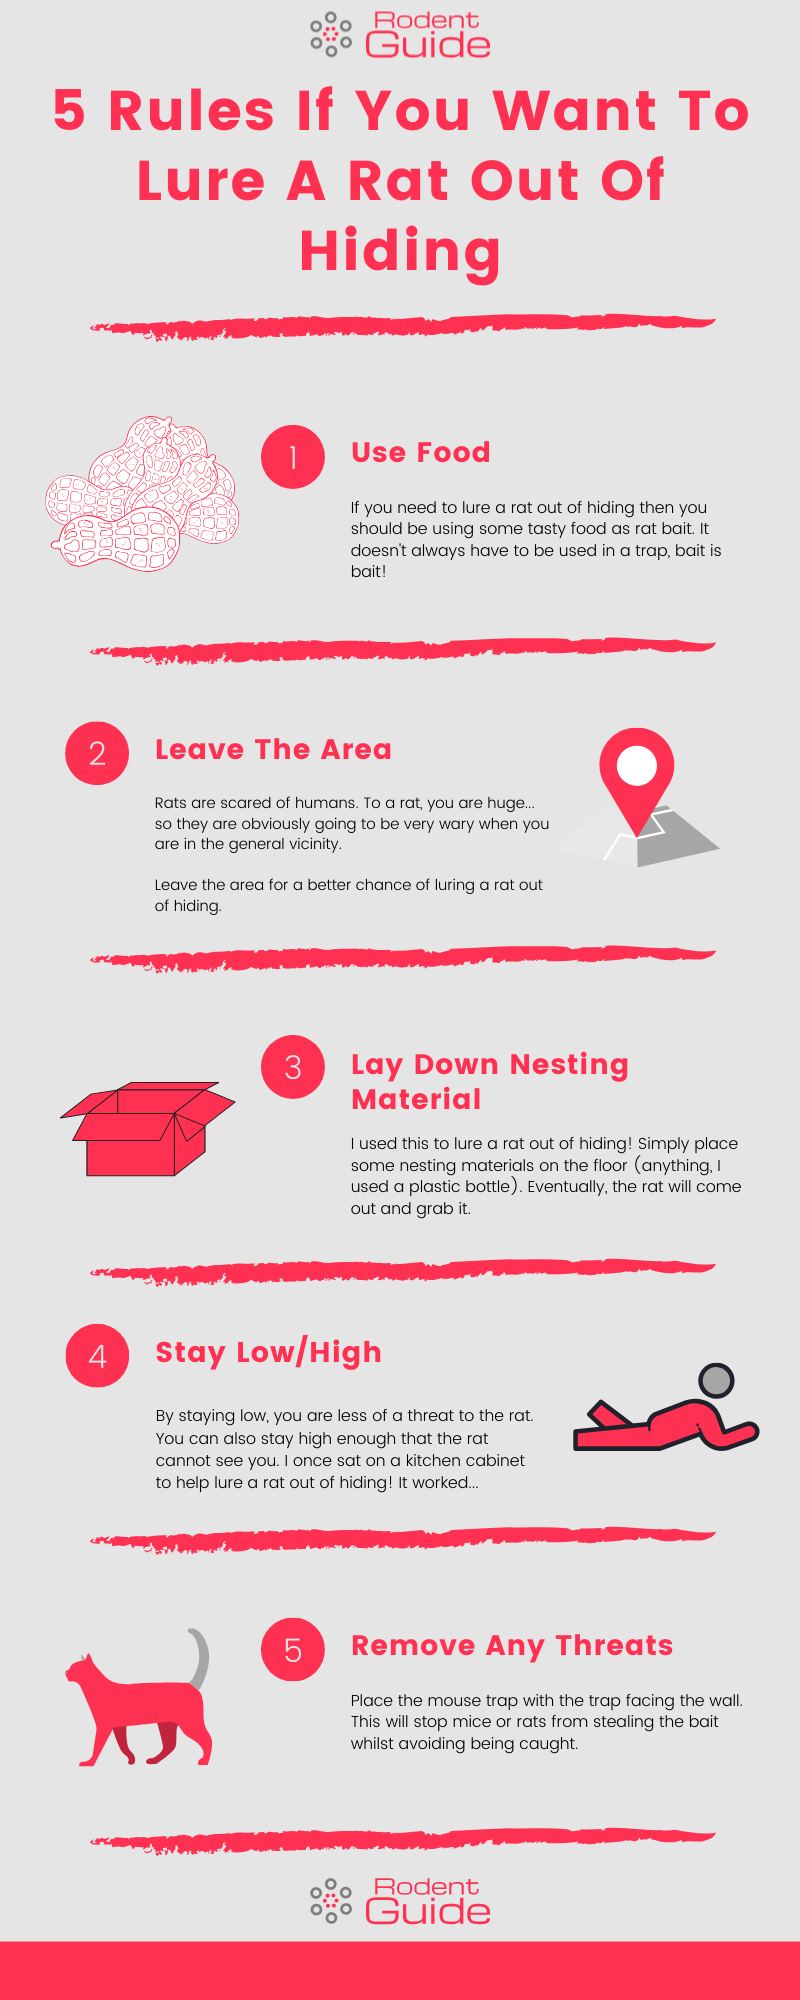 5 Rules If You Want To Lure A Rat Out Of Hiding Infographic